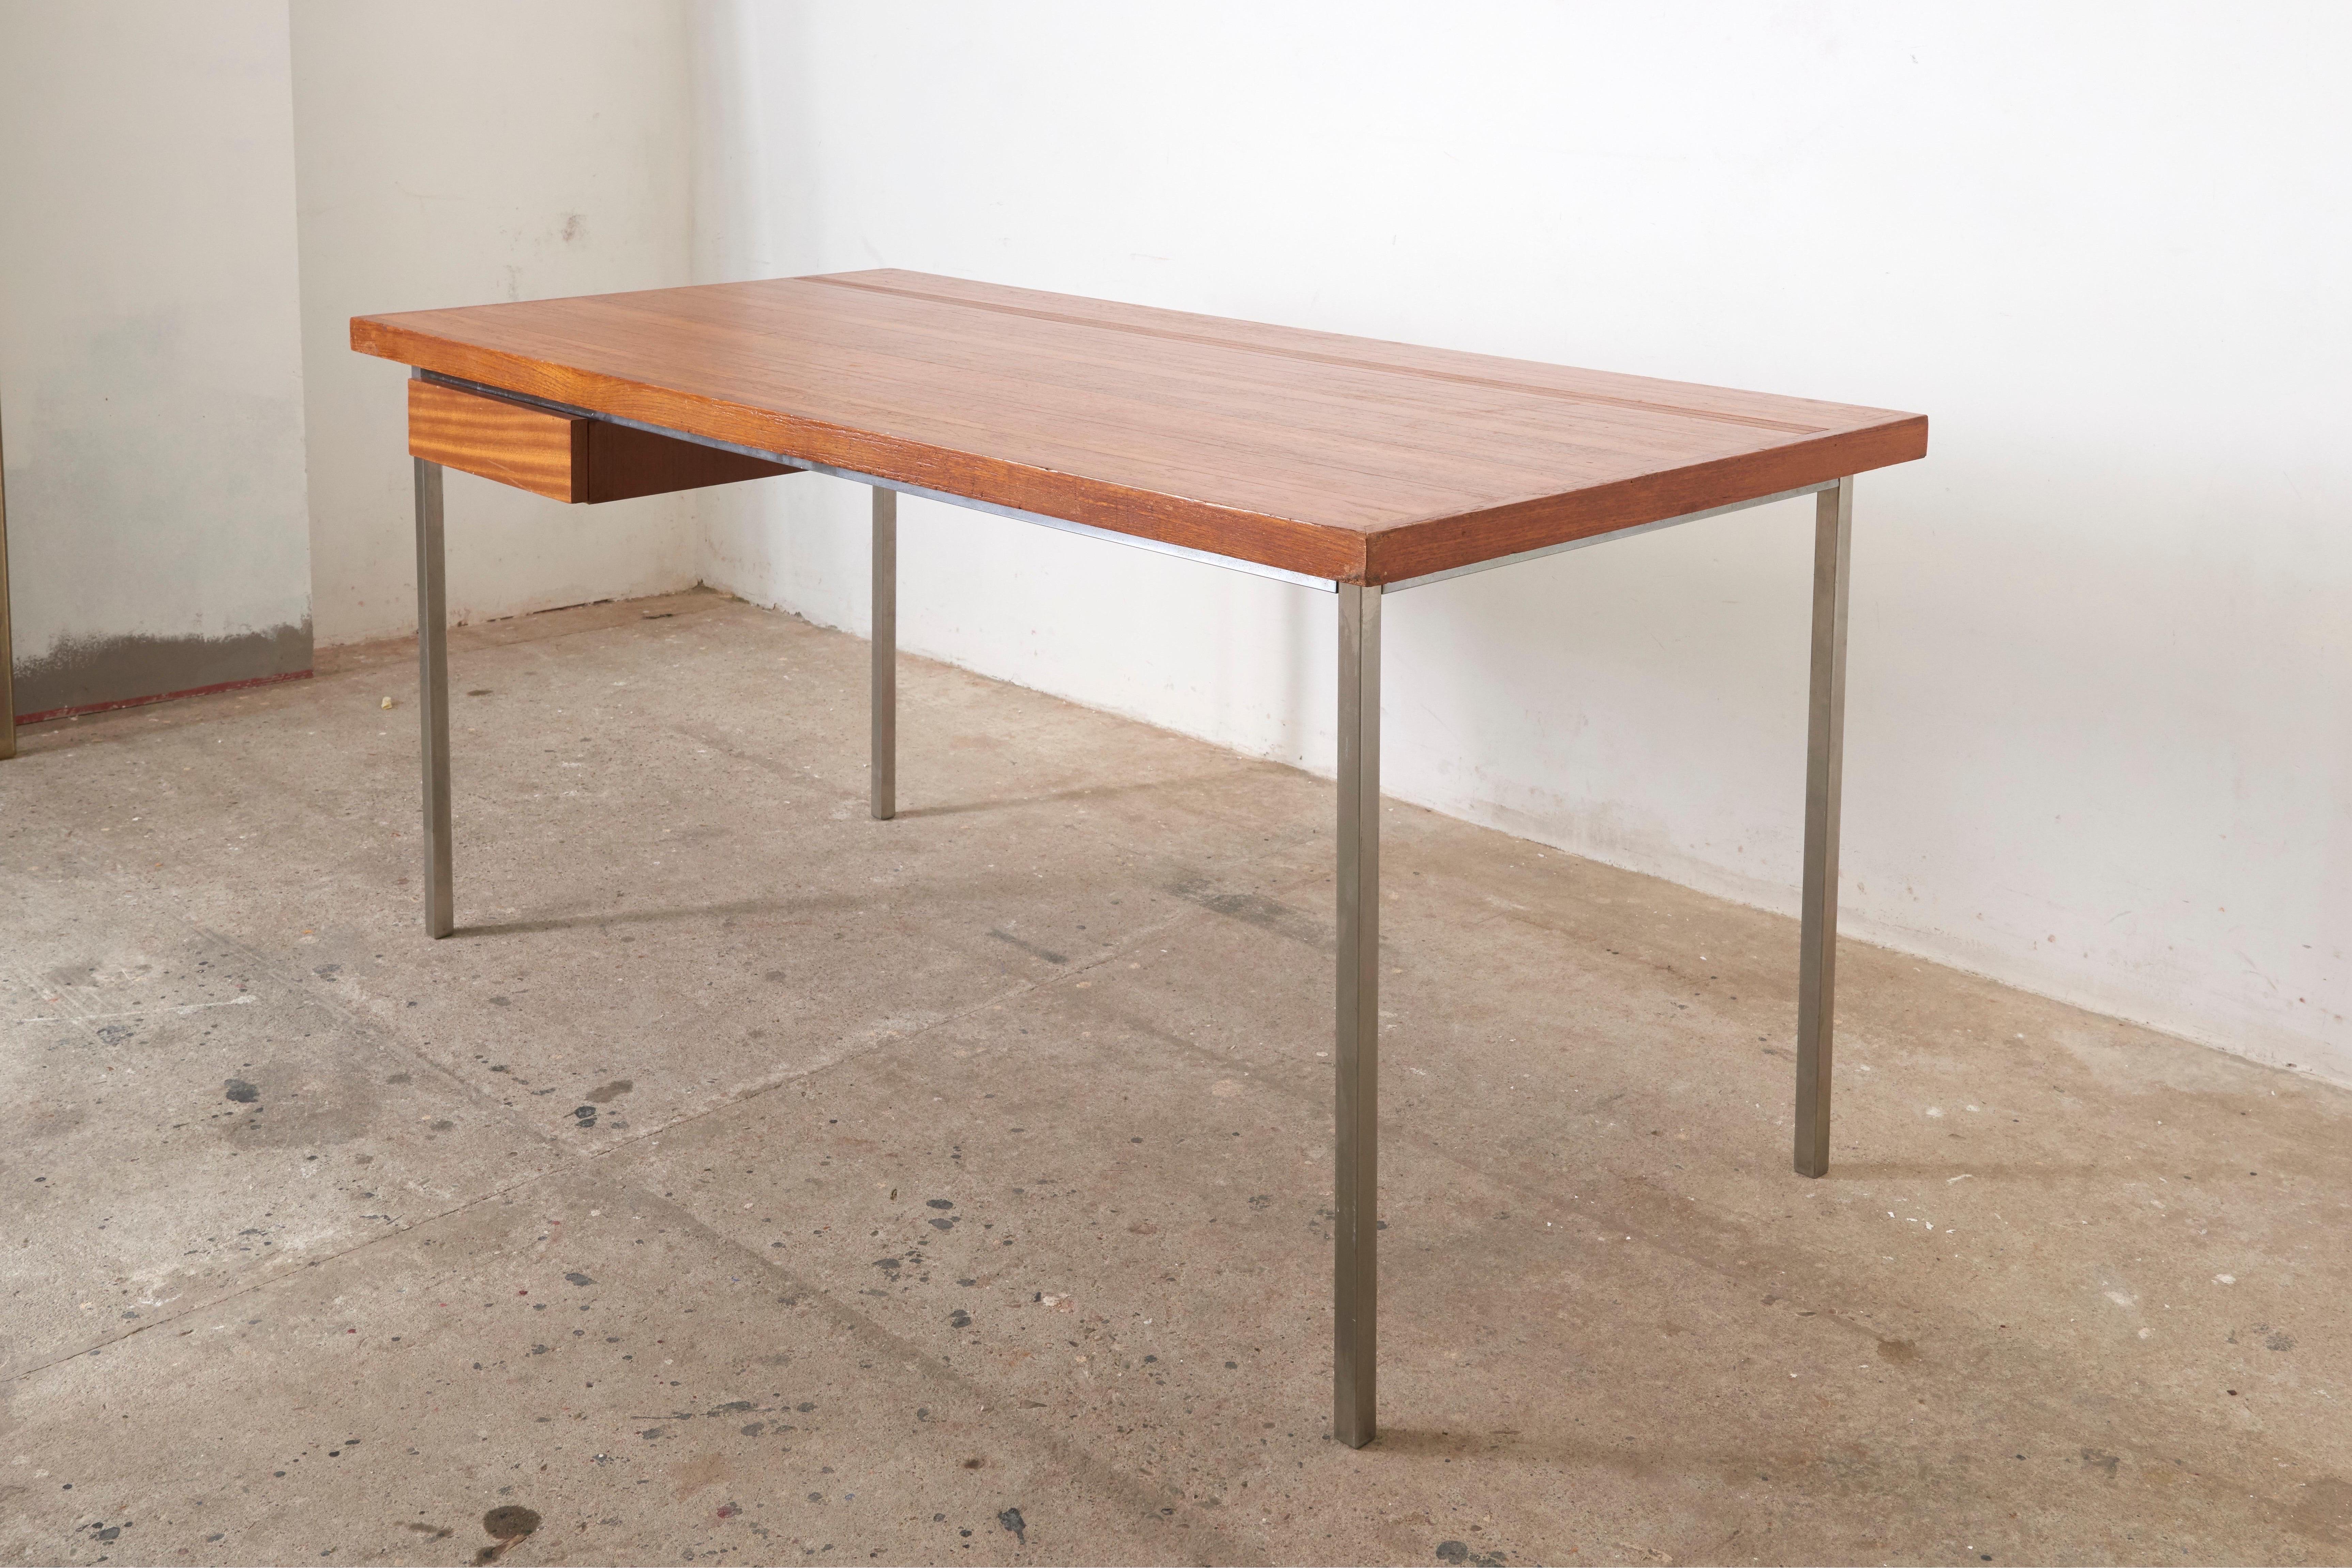 Solid large desk by Philippe Meerman,Belgium Architect designed for the Coene. 

The desk top features a wonderful pattern of barrel features a solid oak wooden top, made of tangentially-sawn oak slats with a steel chromed base construction this